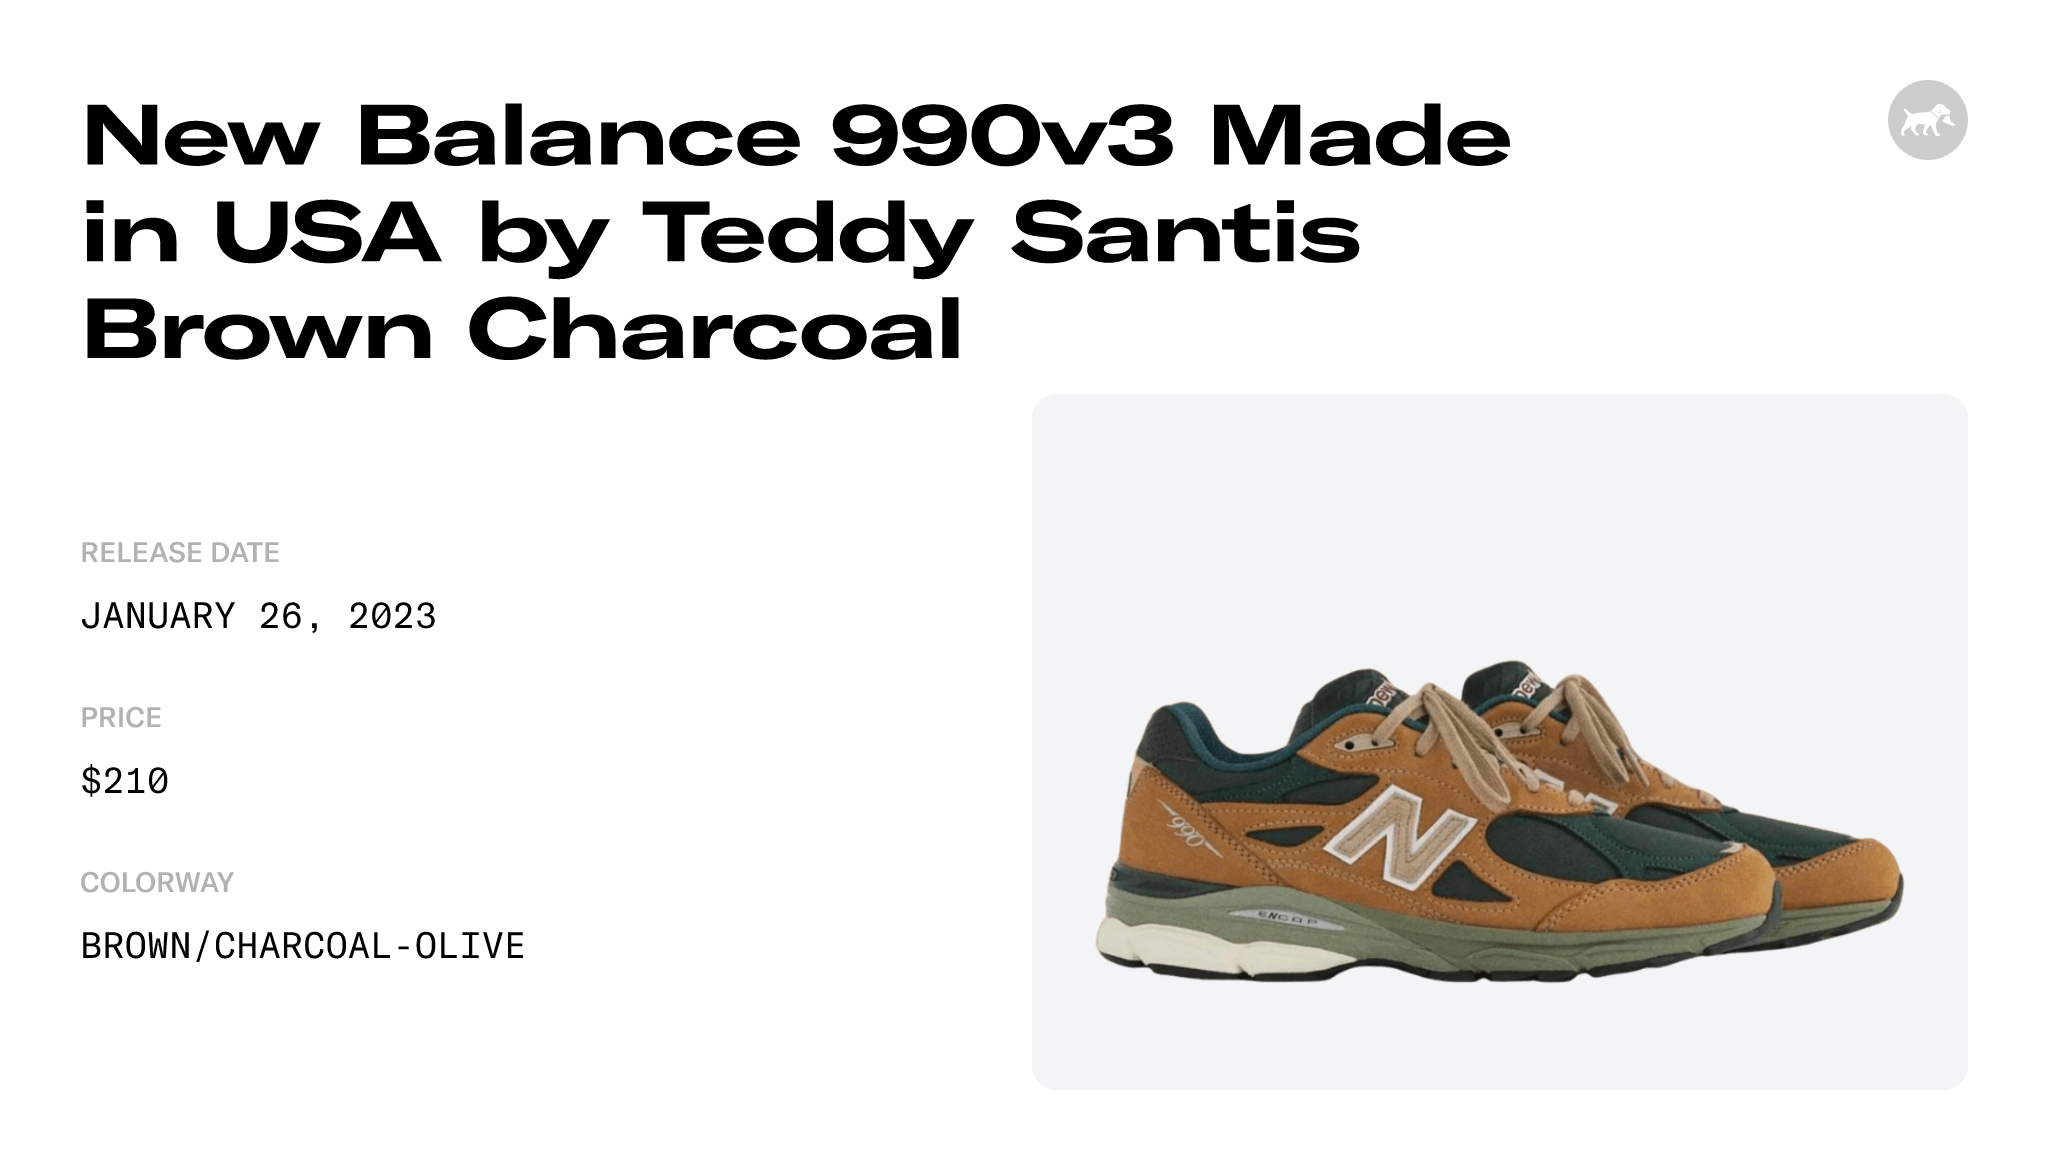 New Balance 990v3 Made in USA by Teddy Santis Brown Charcoal